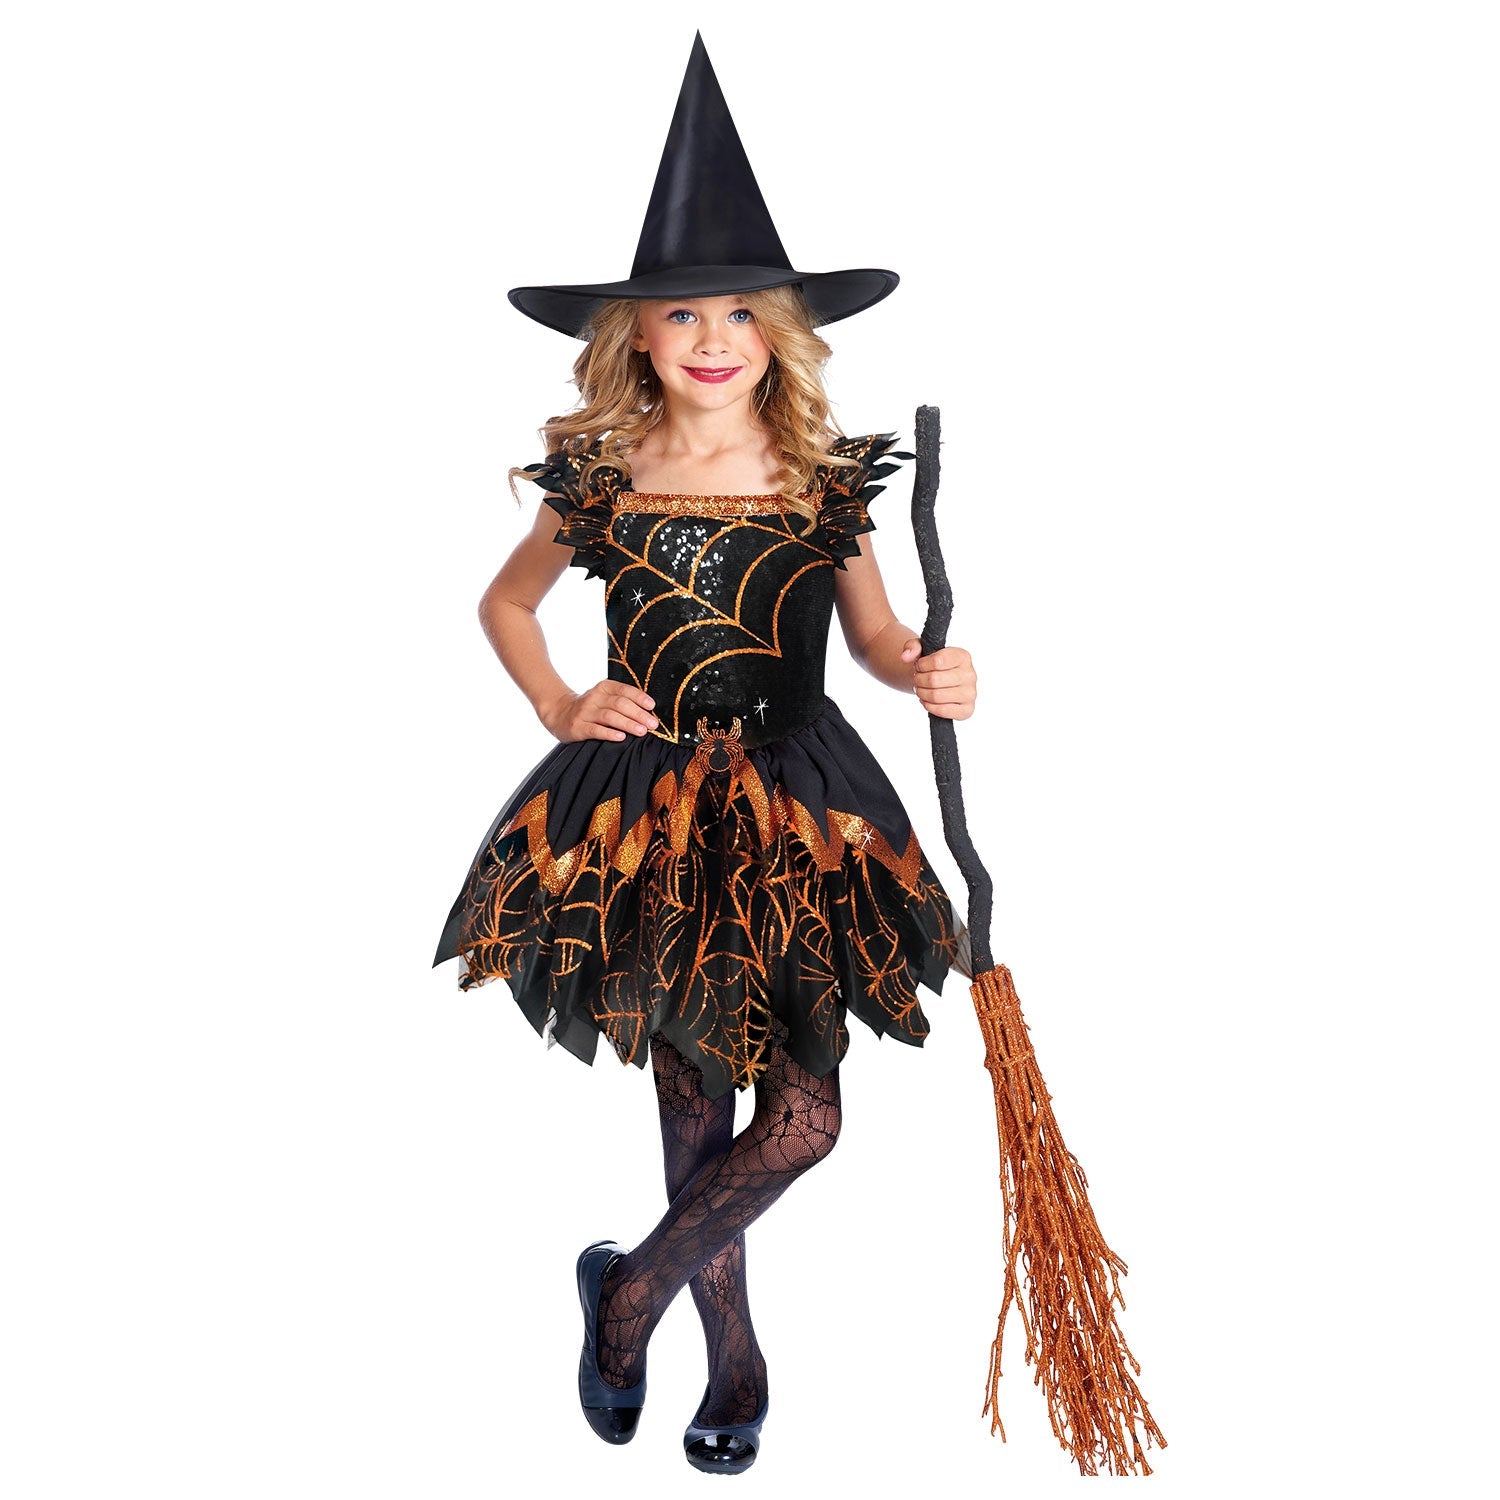 Spooky Witch Spider Costume includes, dress and hat